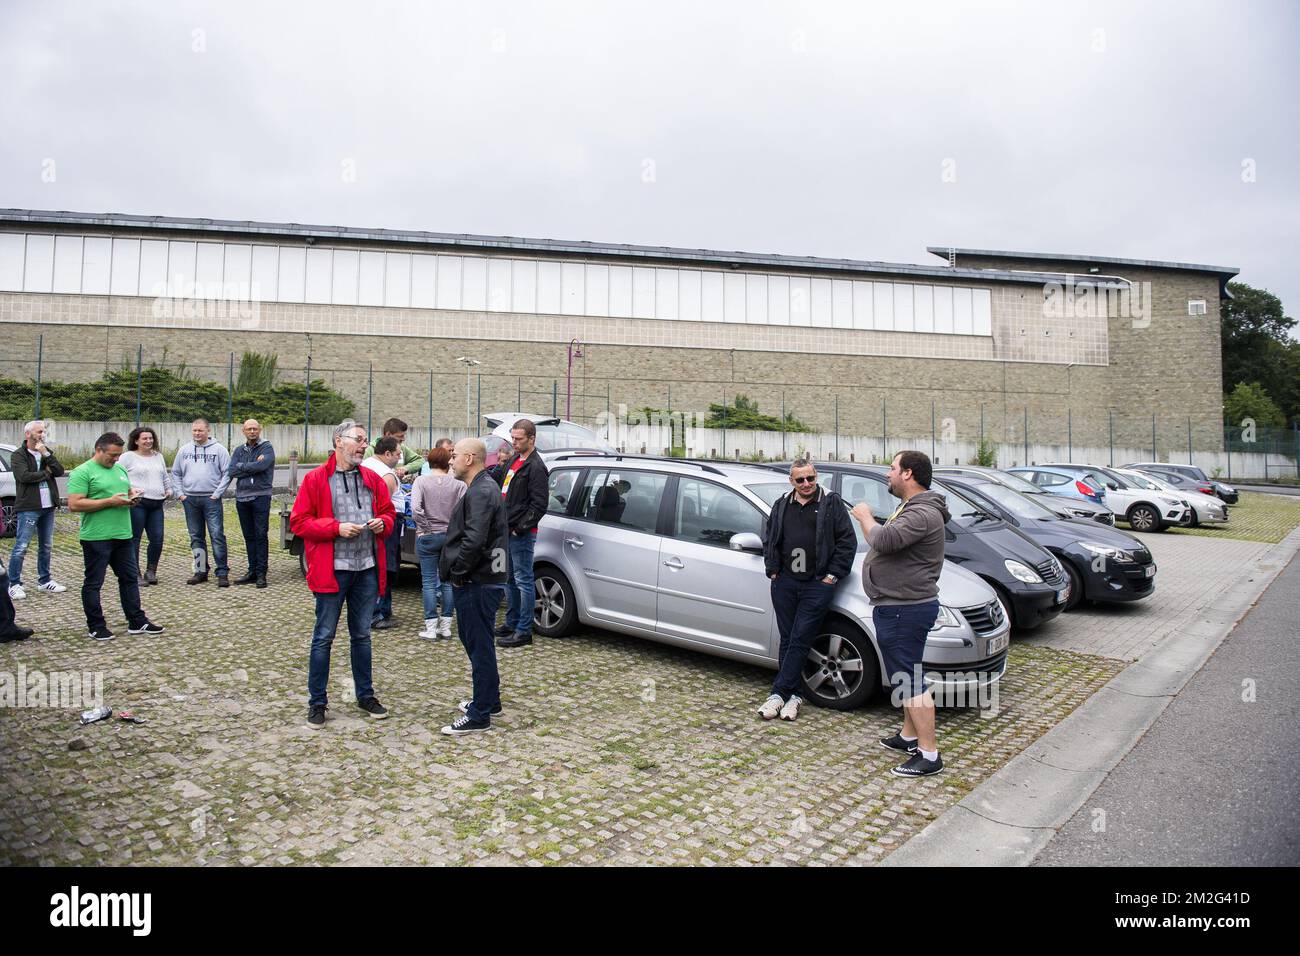 Illustration picture shows a union protest at the Jamioulx prison, during the general strike of the prison wardens, on Tuesday 19 June 2018. BELGA PHOTO LAURIE DIEFFEMBACQ  Stock Photo